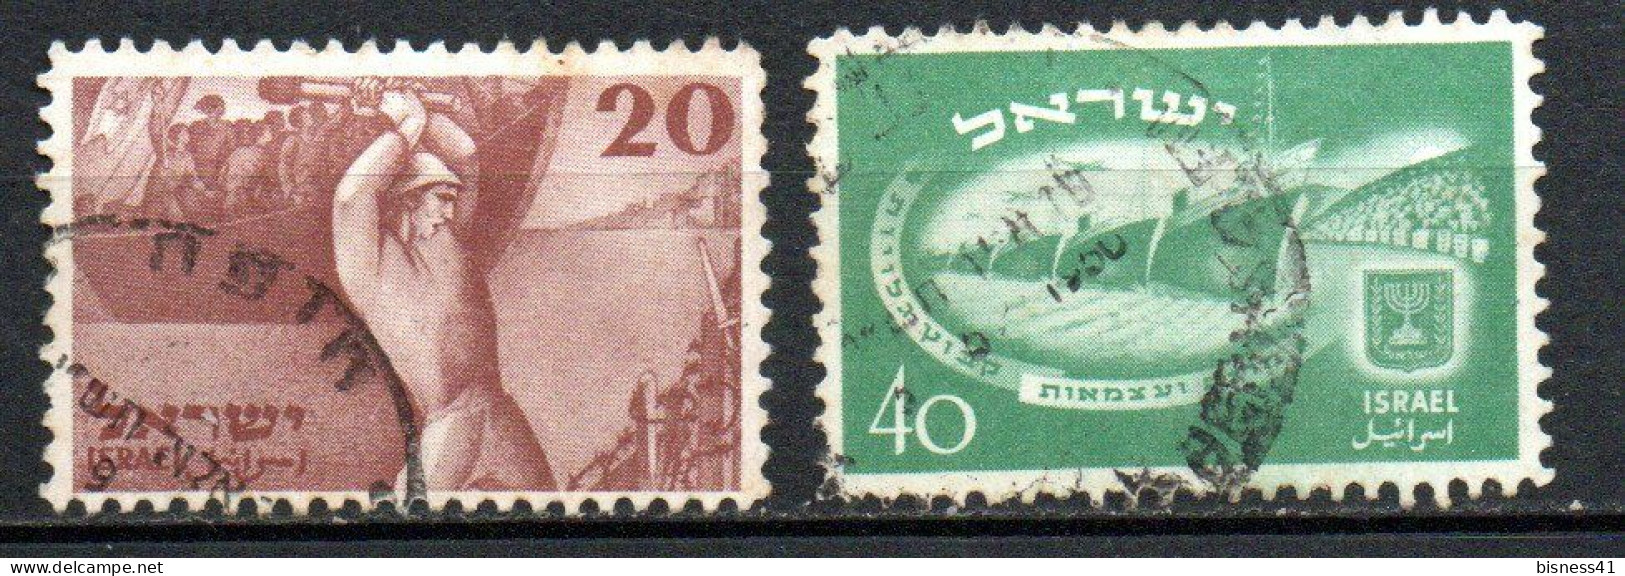 Col33 Israel  1950  N° 29 & 30  Oblitéré  Cote : 15,00€ - Used Stamps (without Tabs)